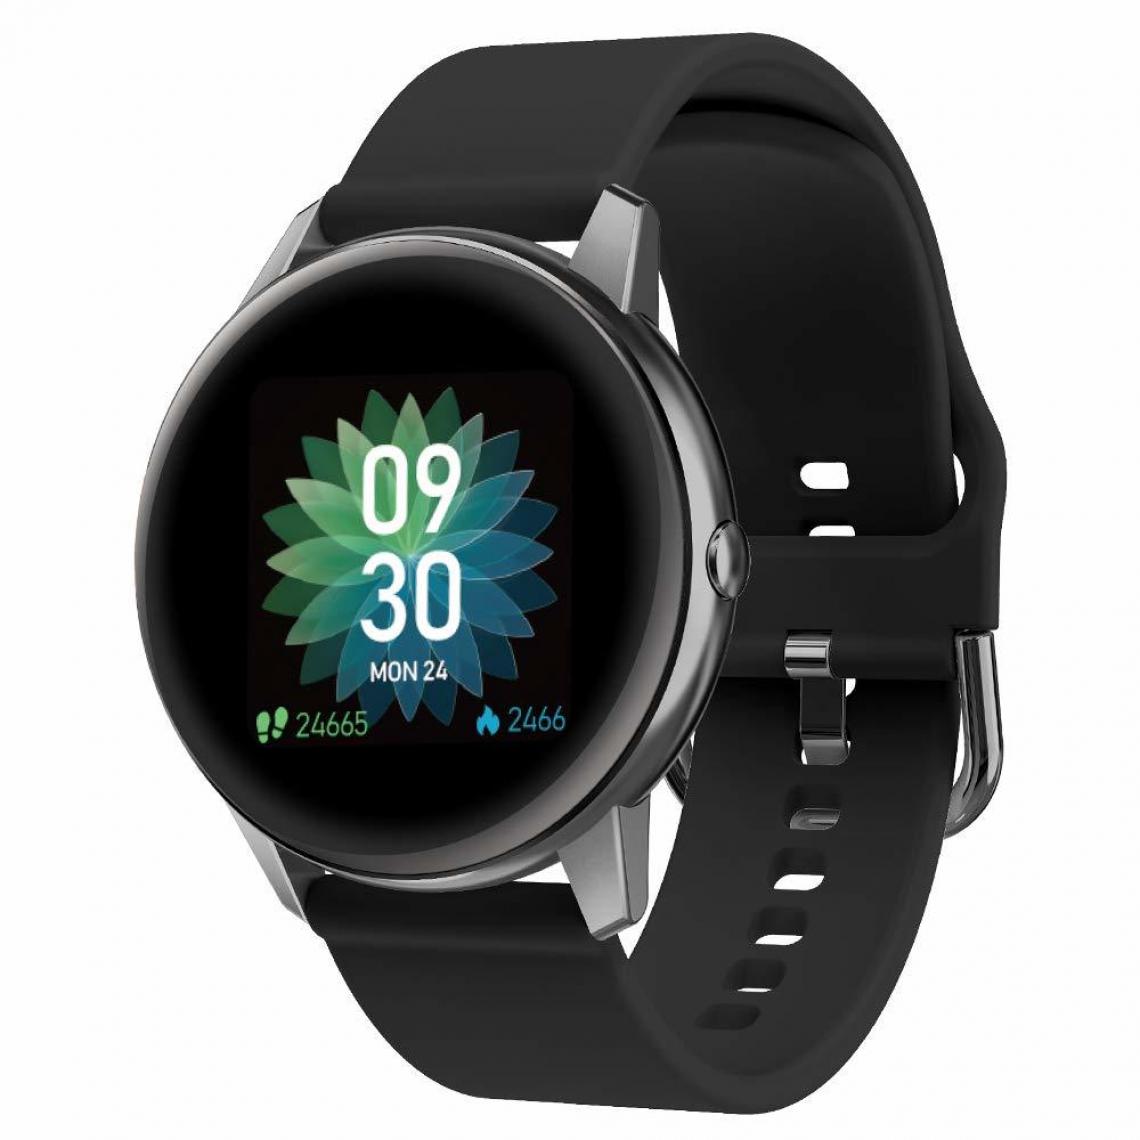 Chronotech Montres - Chronus Smart Watches Fitness Tracker with Heart Rate Blood Pressure Monitor Message Call Notification IP68 Waterproof Pedometer 1.3 inch Full Touch Bluetooth Smartwatch(black) - Montre connectée